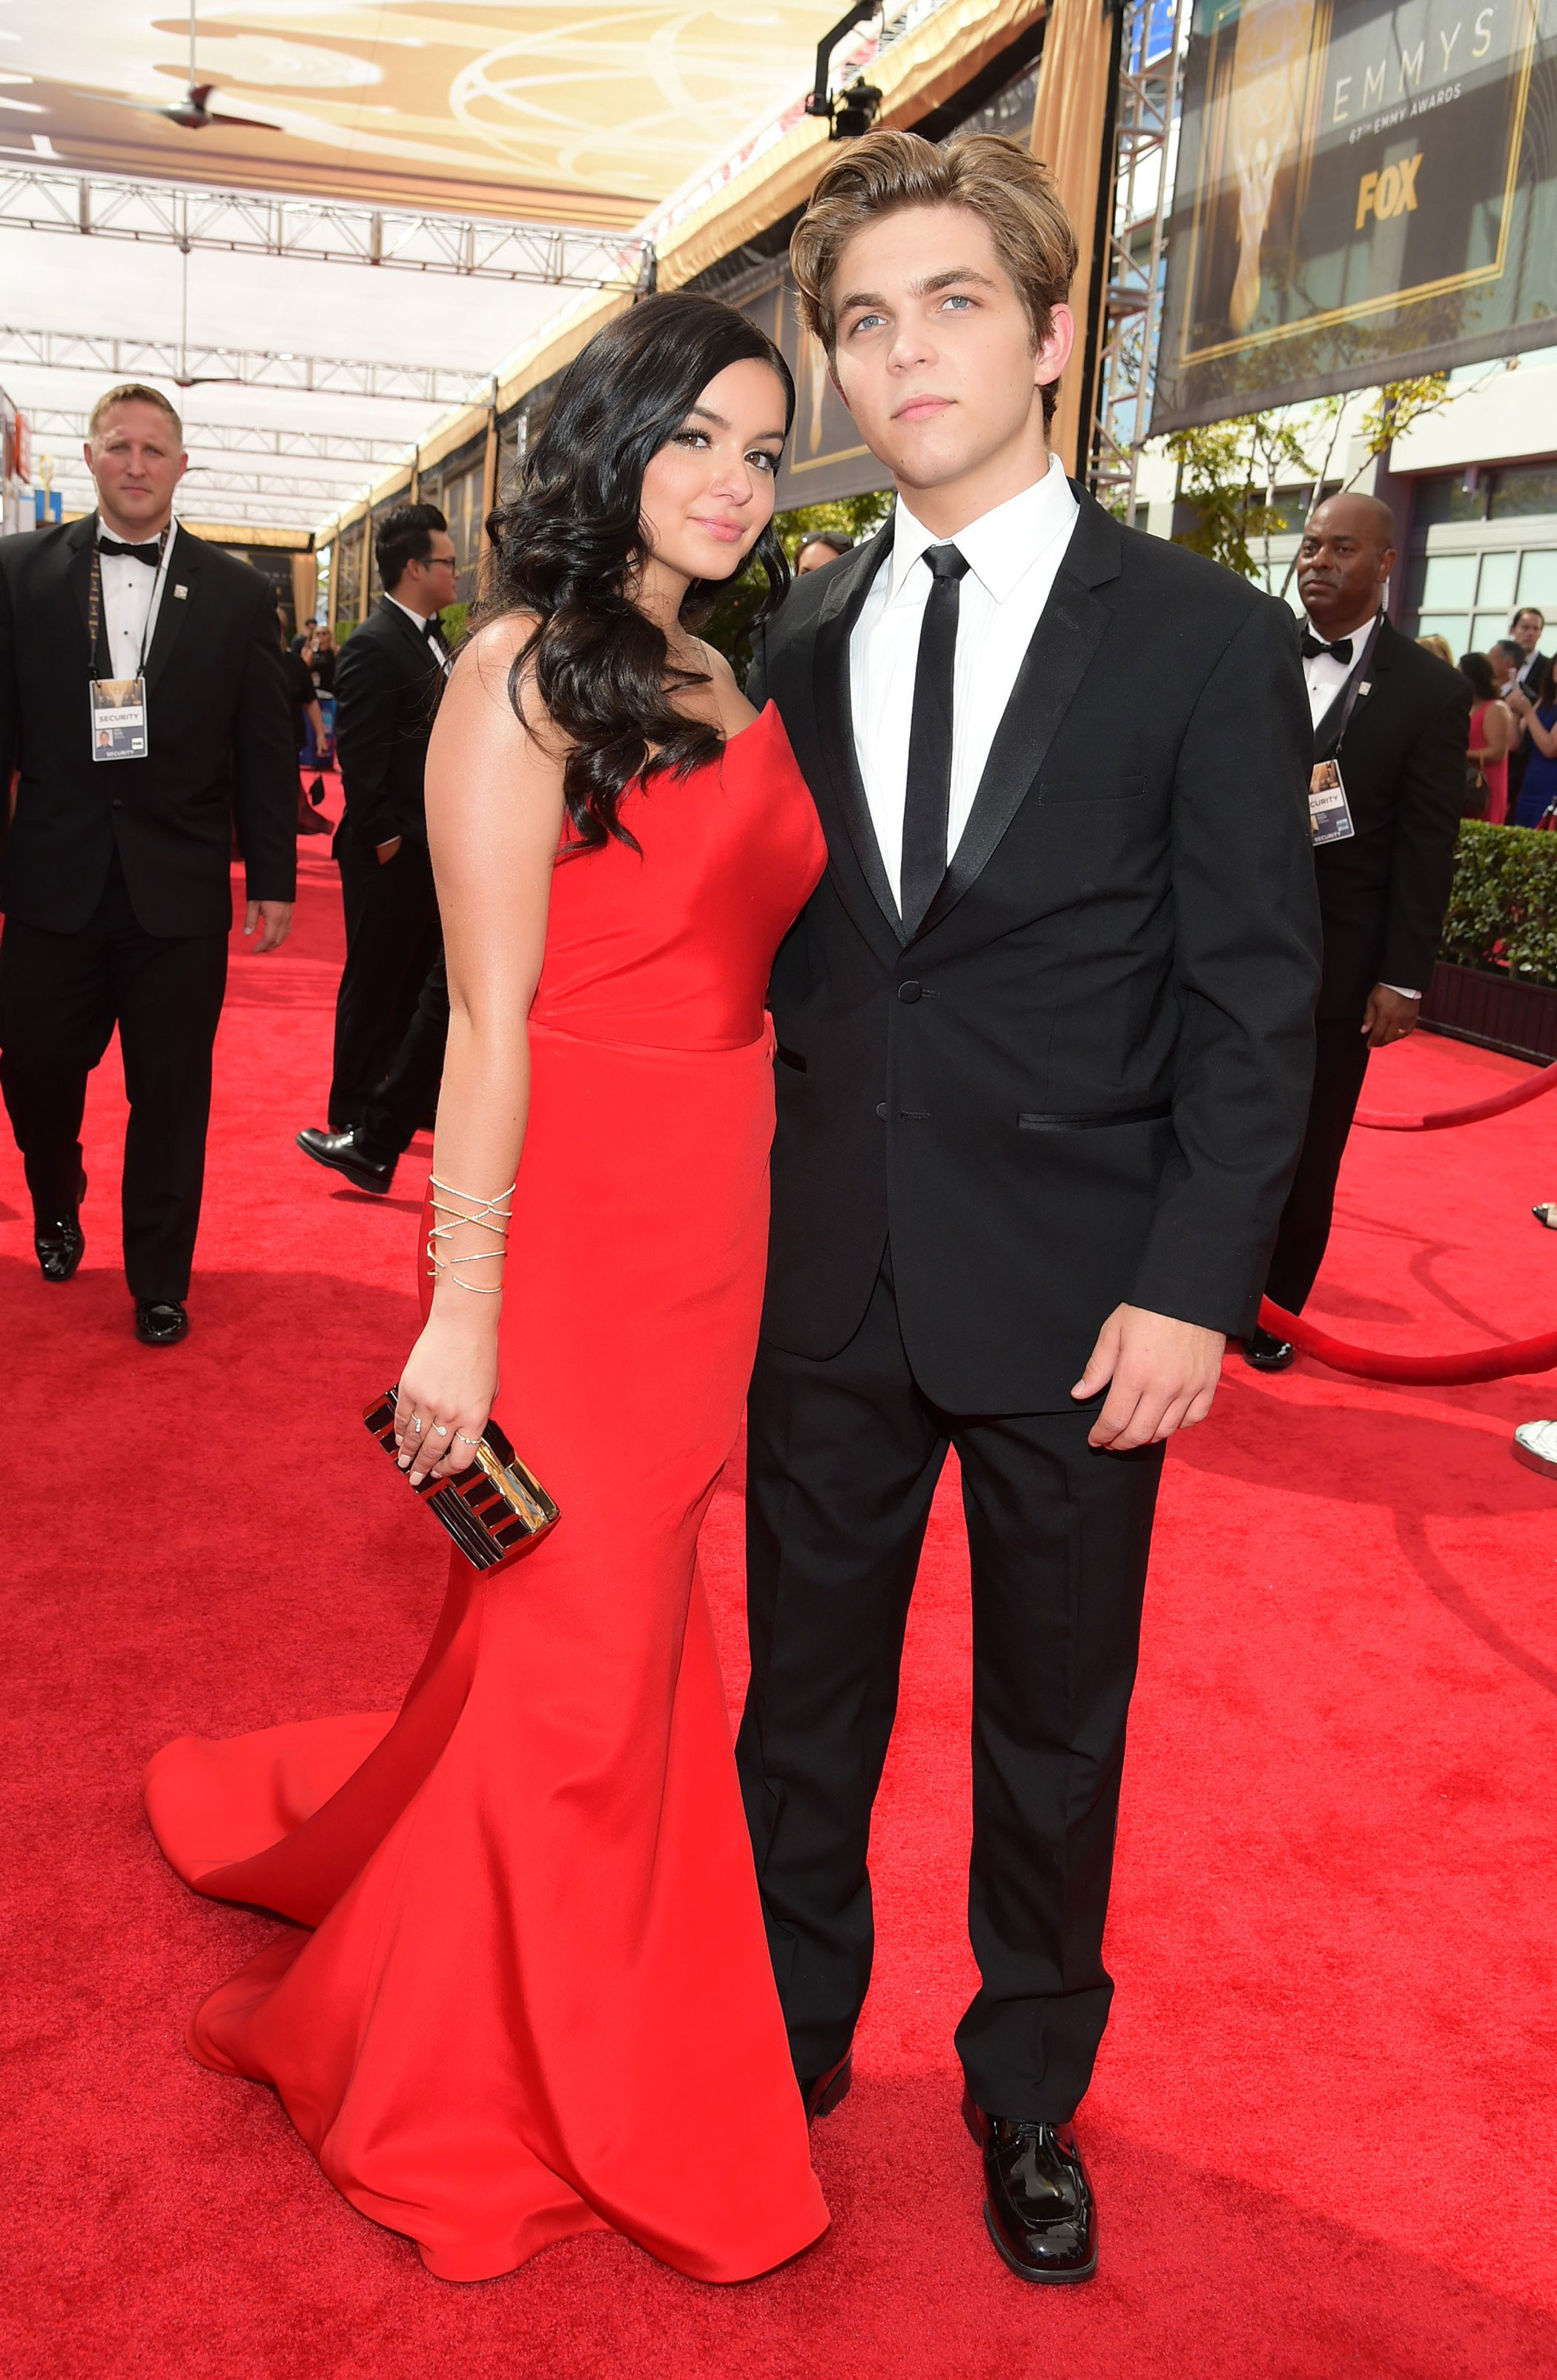 67th Emmys Awards - Ariel Winter and Laurent Claude Gaudette - 2015